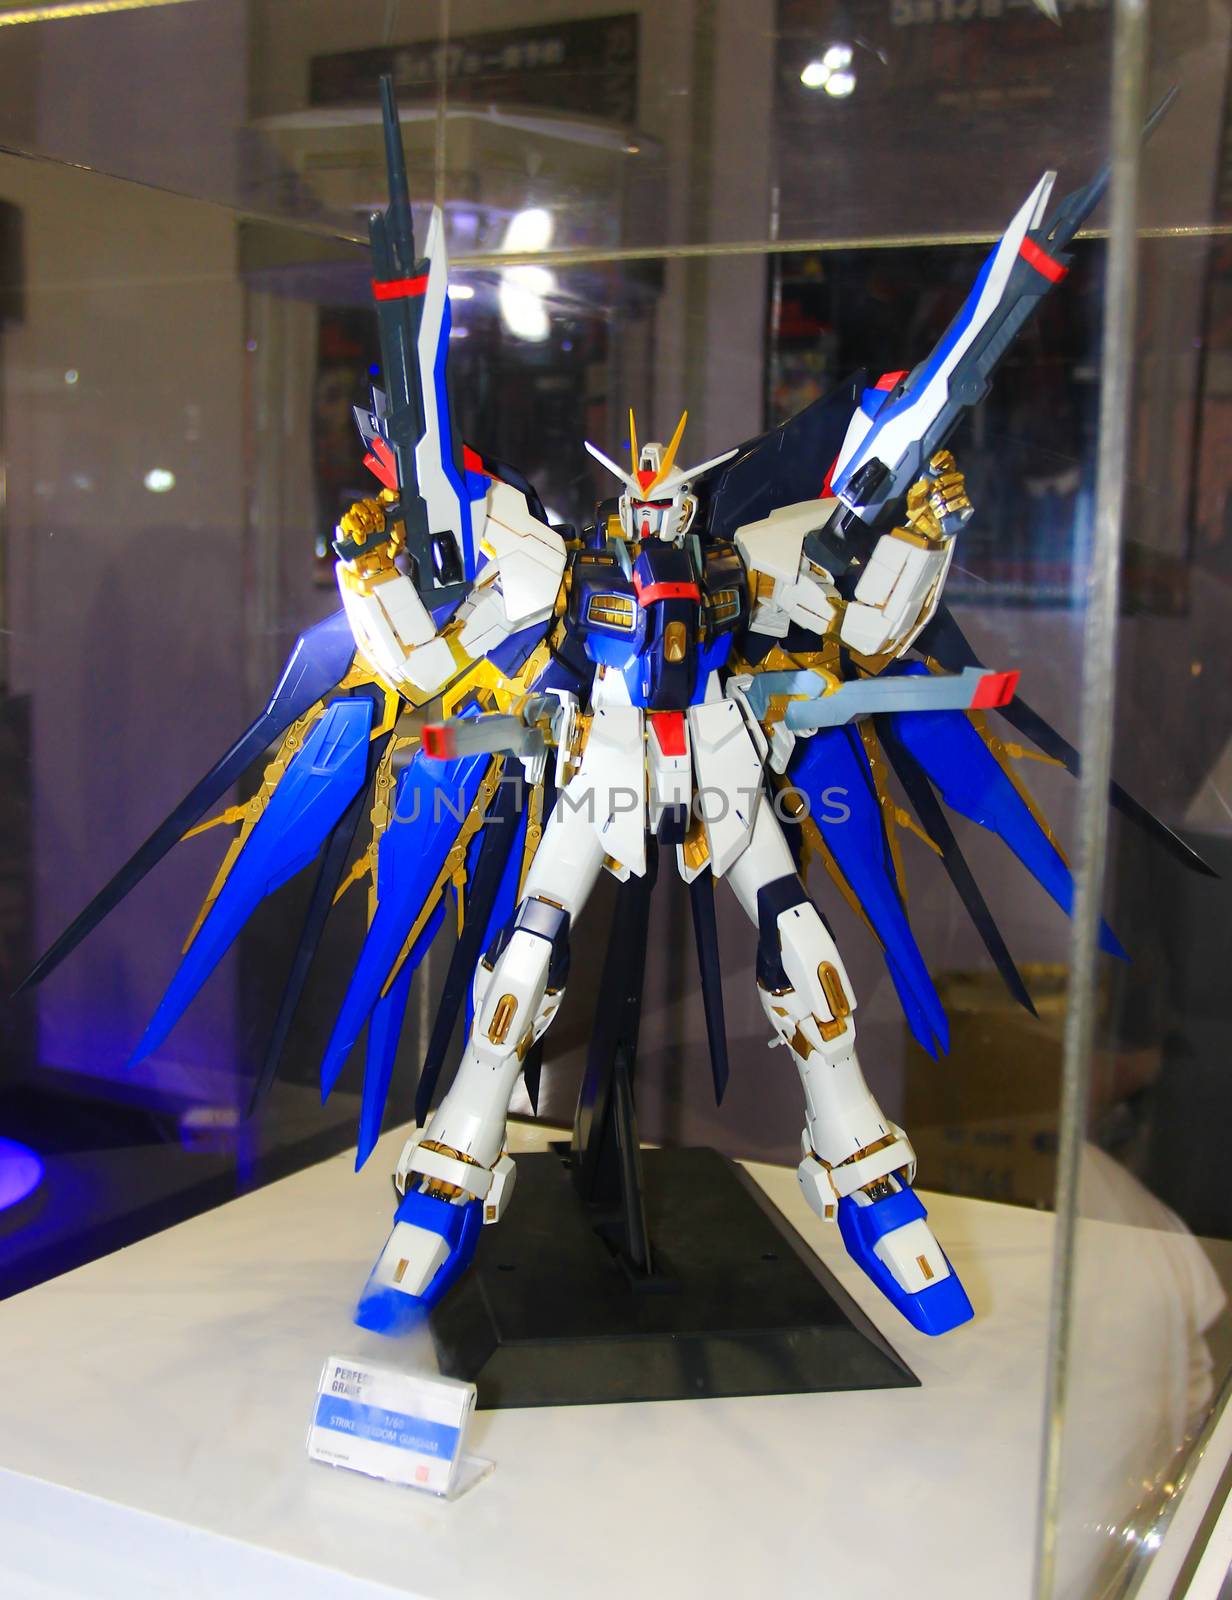 A model of the character Gundam from the movies and comics 9 by redthirteen